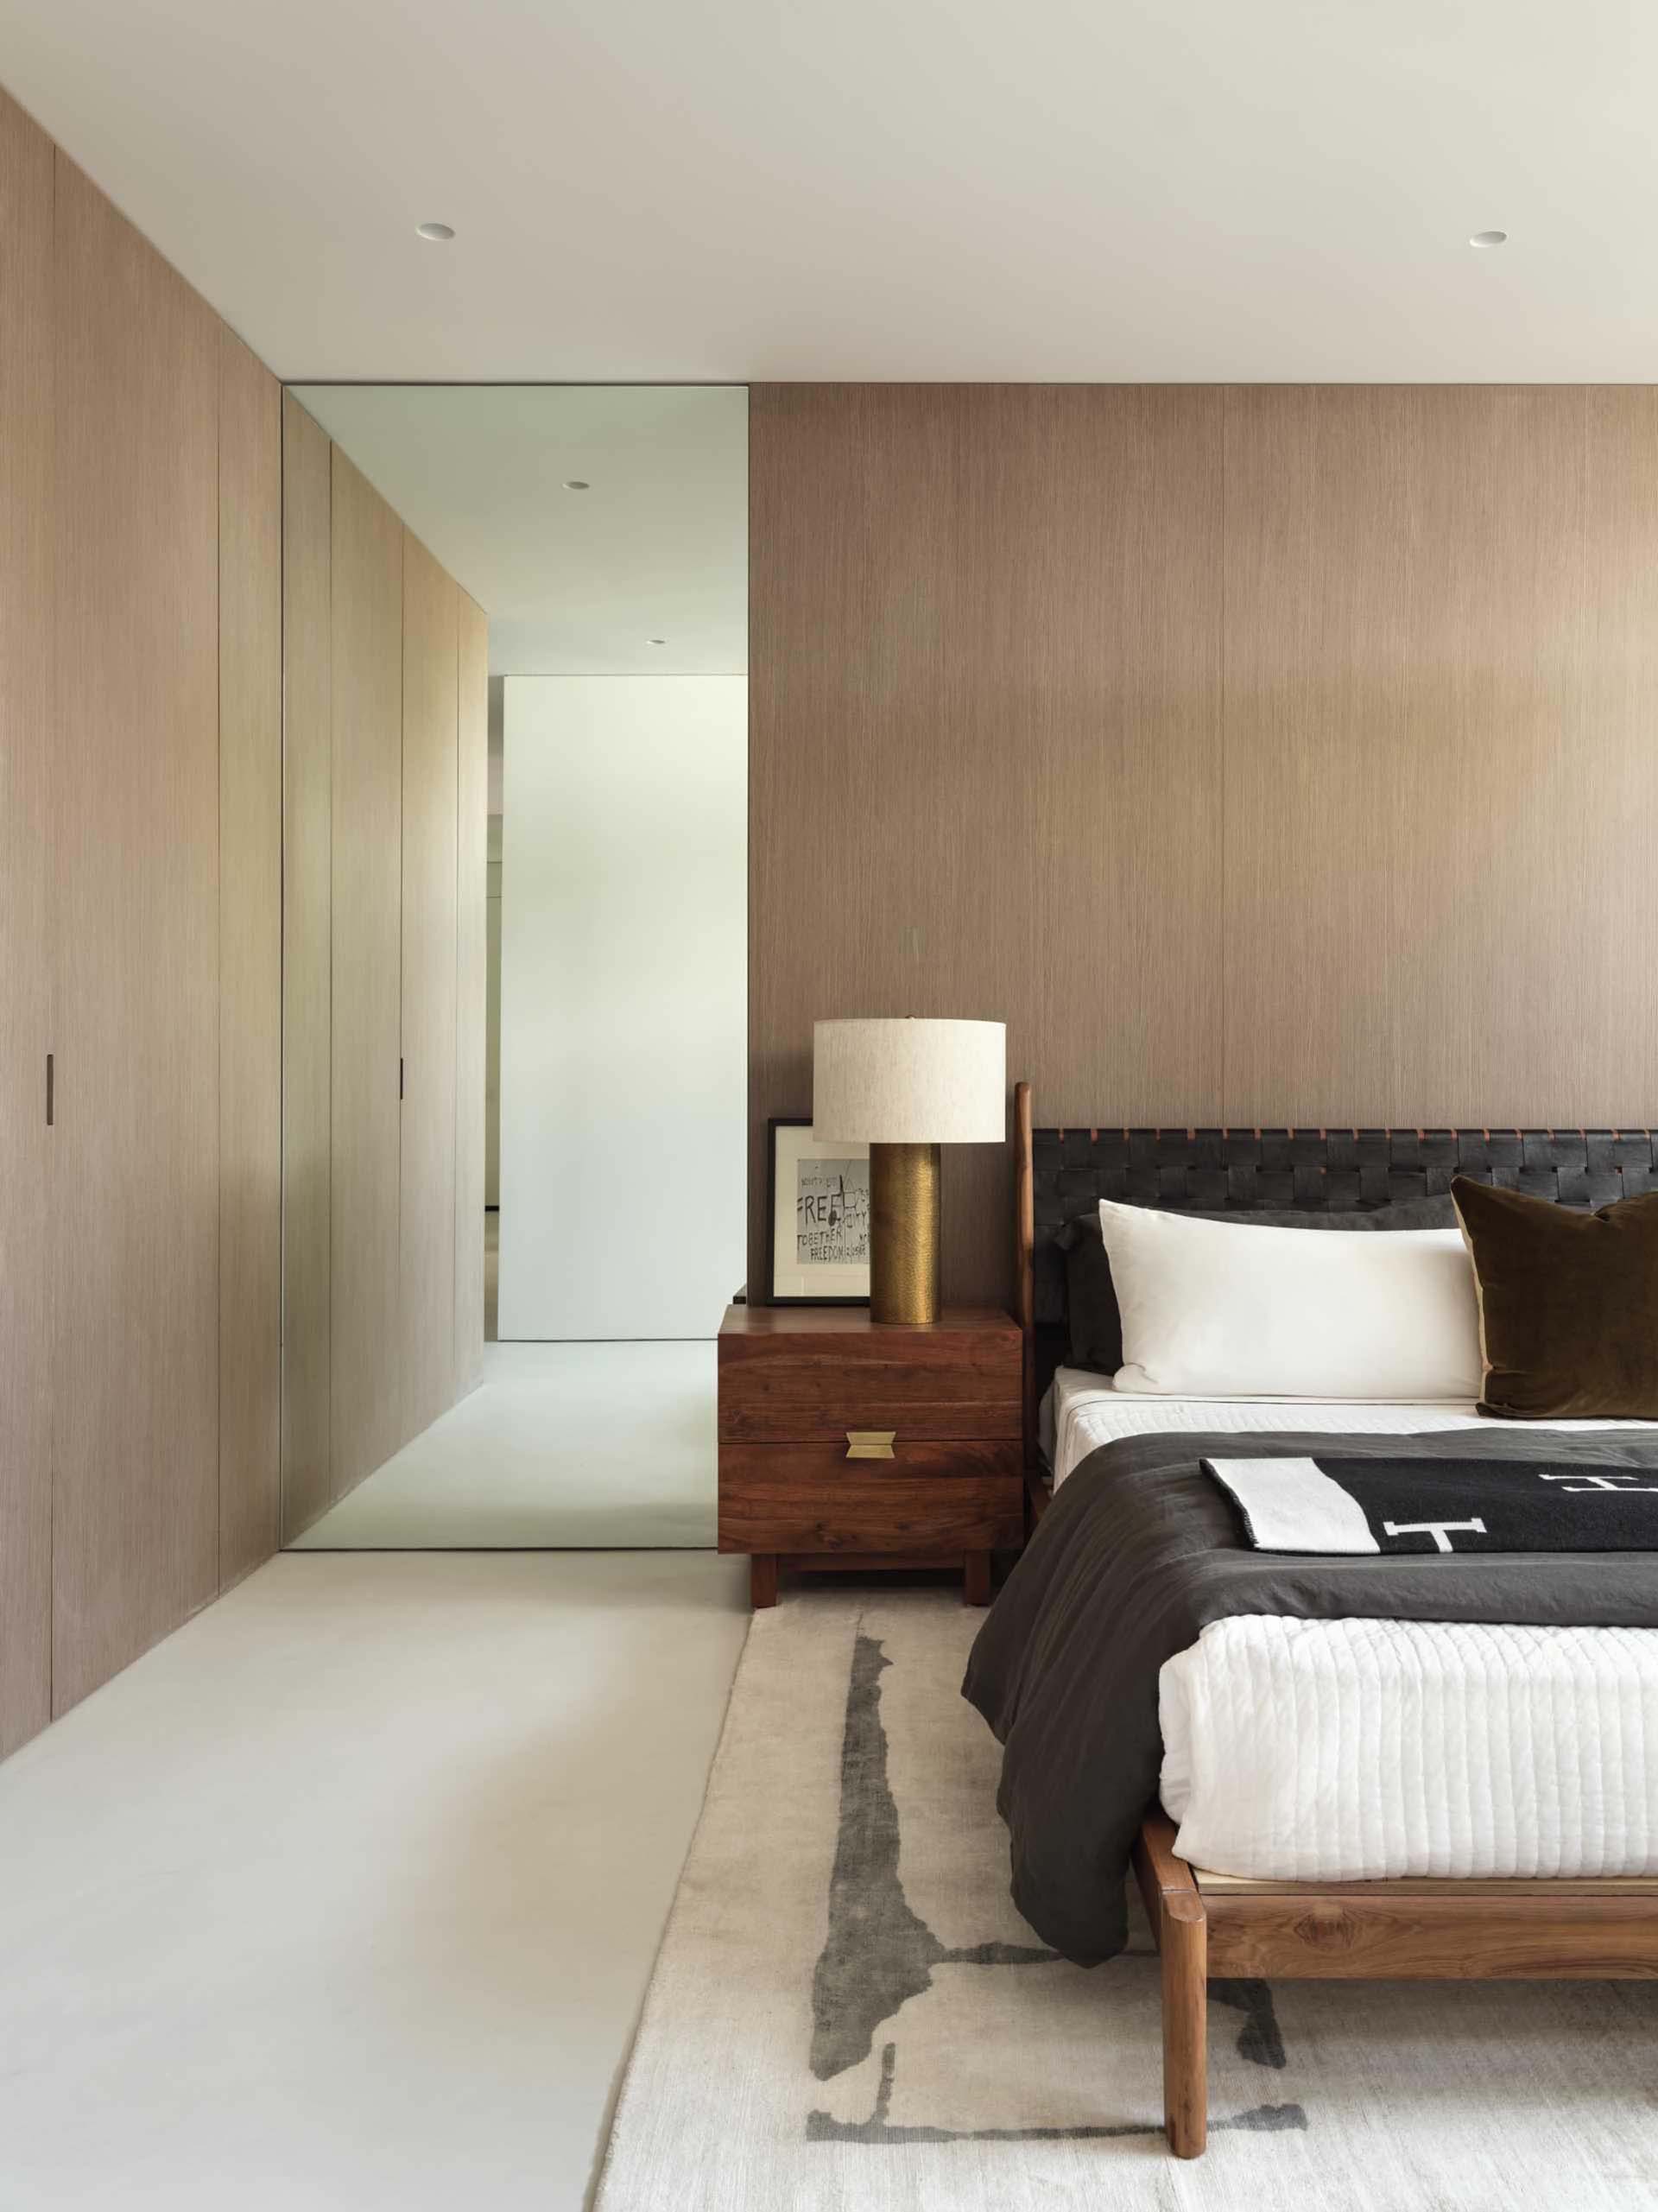 A modern bedroom with a wood accent wall and floor to ceiling mirror.